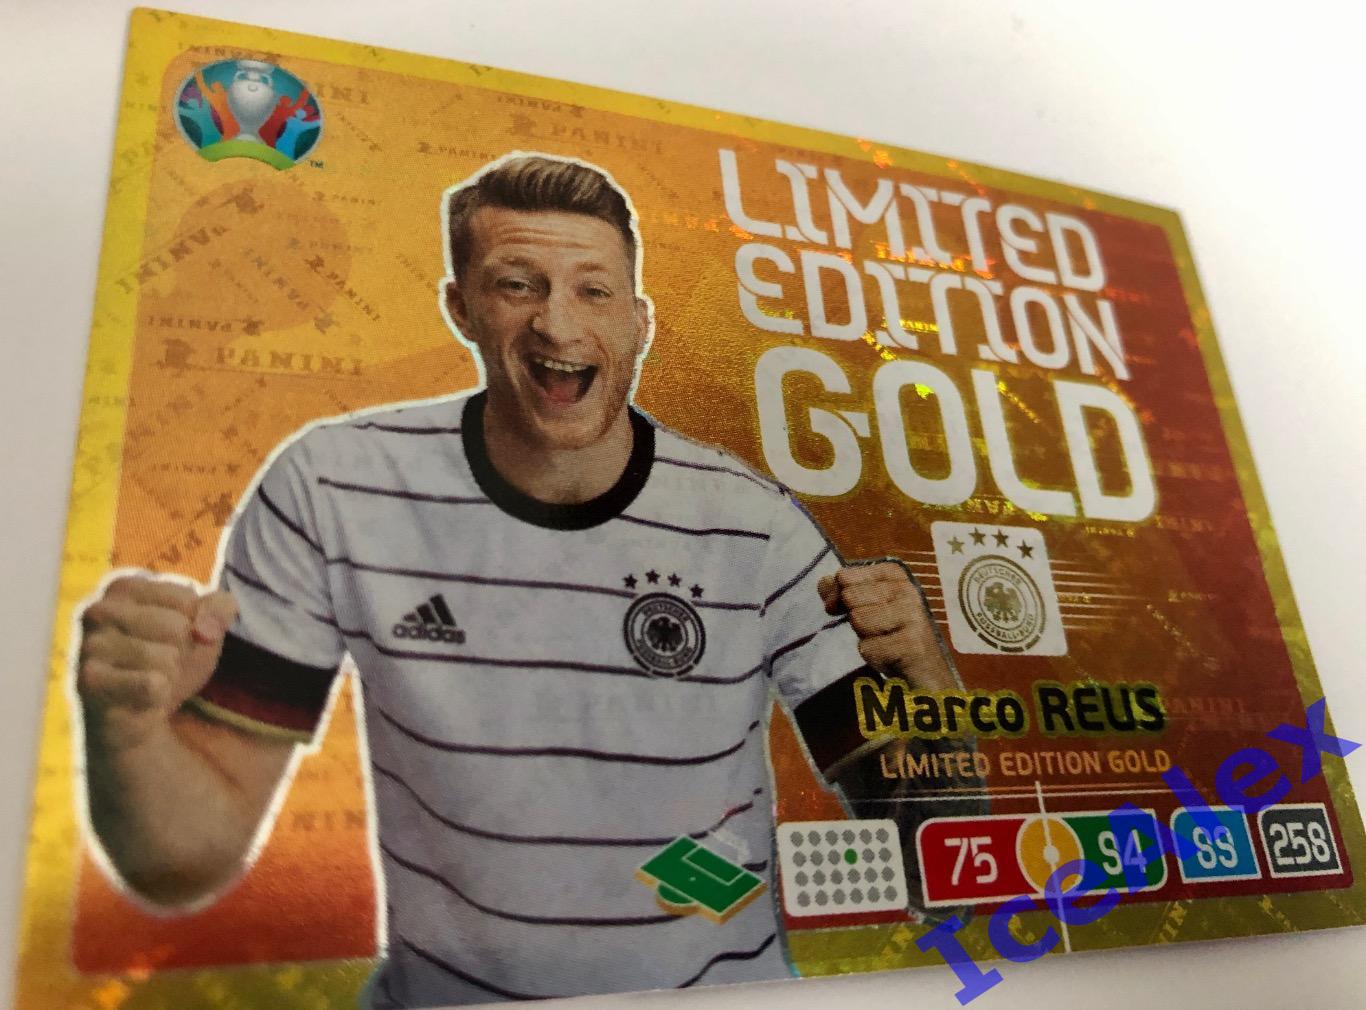 2020 Panini Adrenalyn XL, Euro Preview, Marco Reus, Gold Limited Edition 1